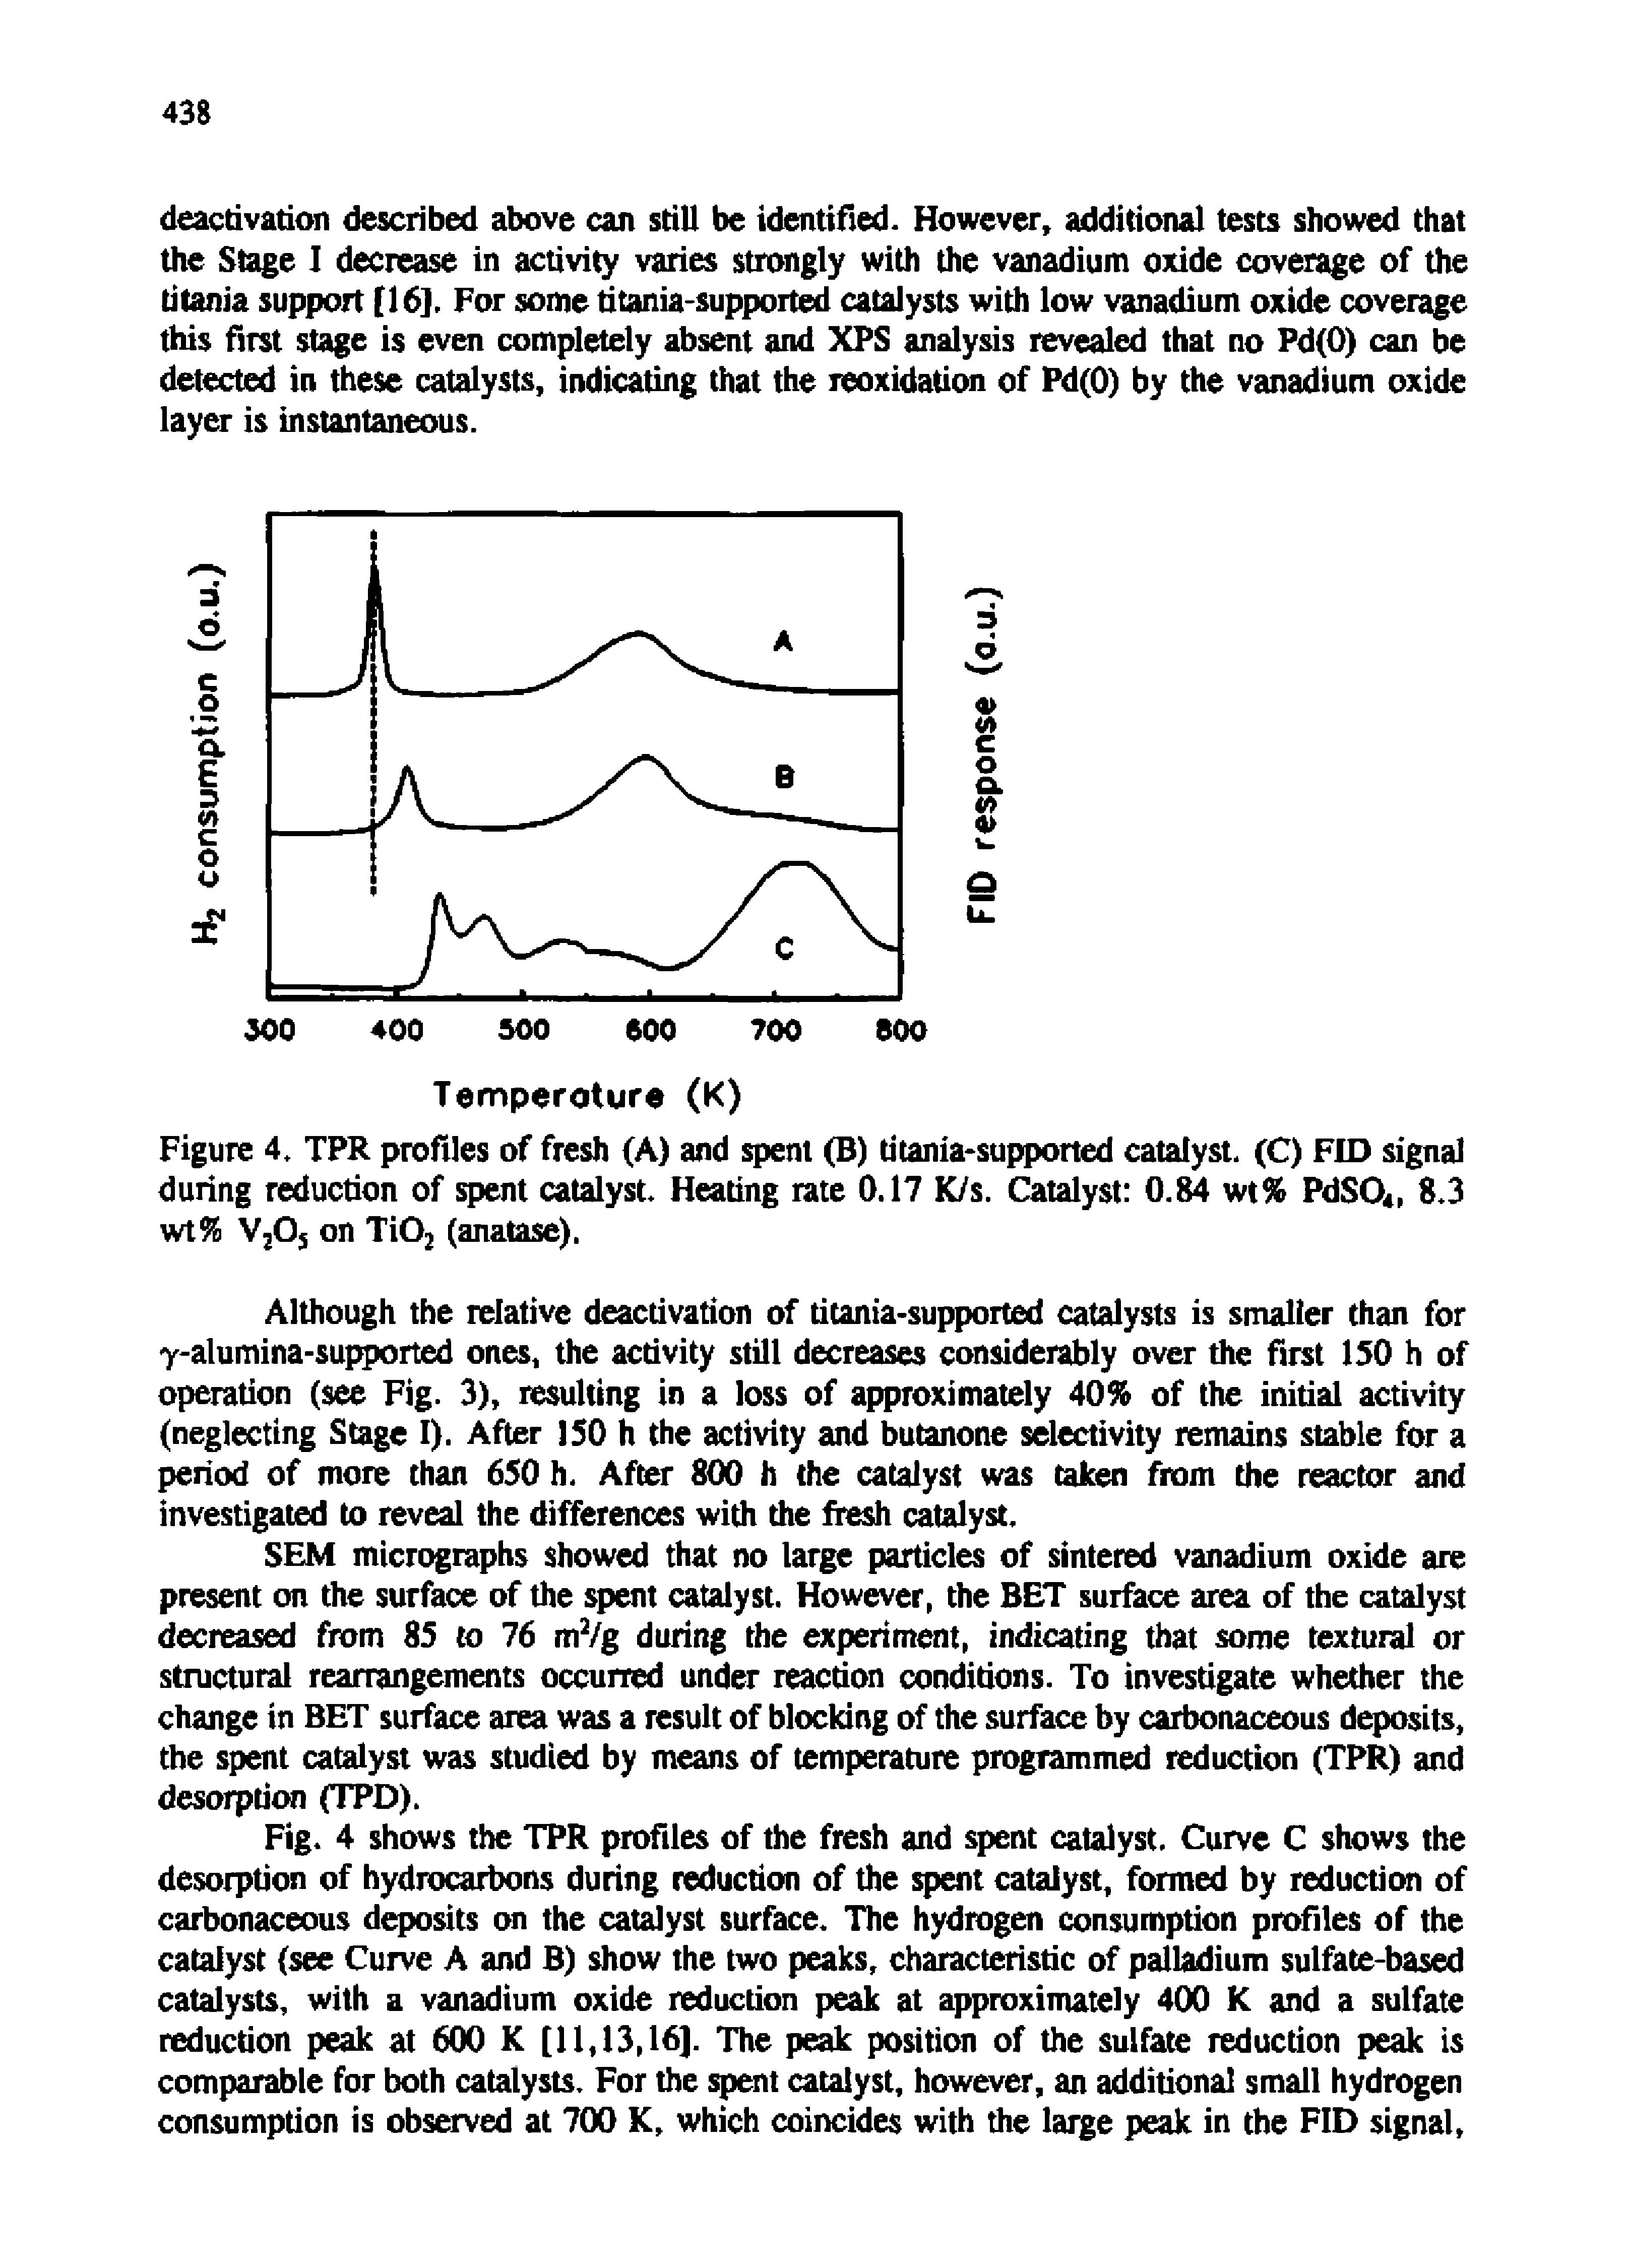 Figure 4. TPR profiles of fresh (A) and spent (B) titania-supported catalyst. (C) FID signal during reduction of spent catalyst. Heating rate 0.17 K/s. Catalyst 0.84 wt% PdSO, 8.3 wi% V3Os on Ti03 (anatase).